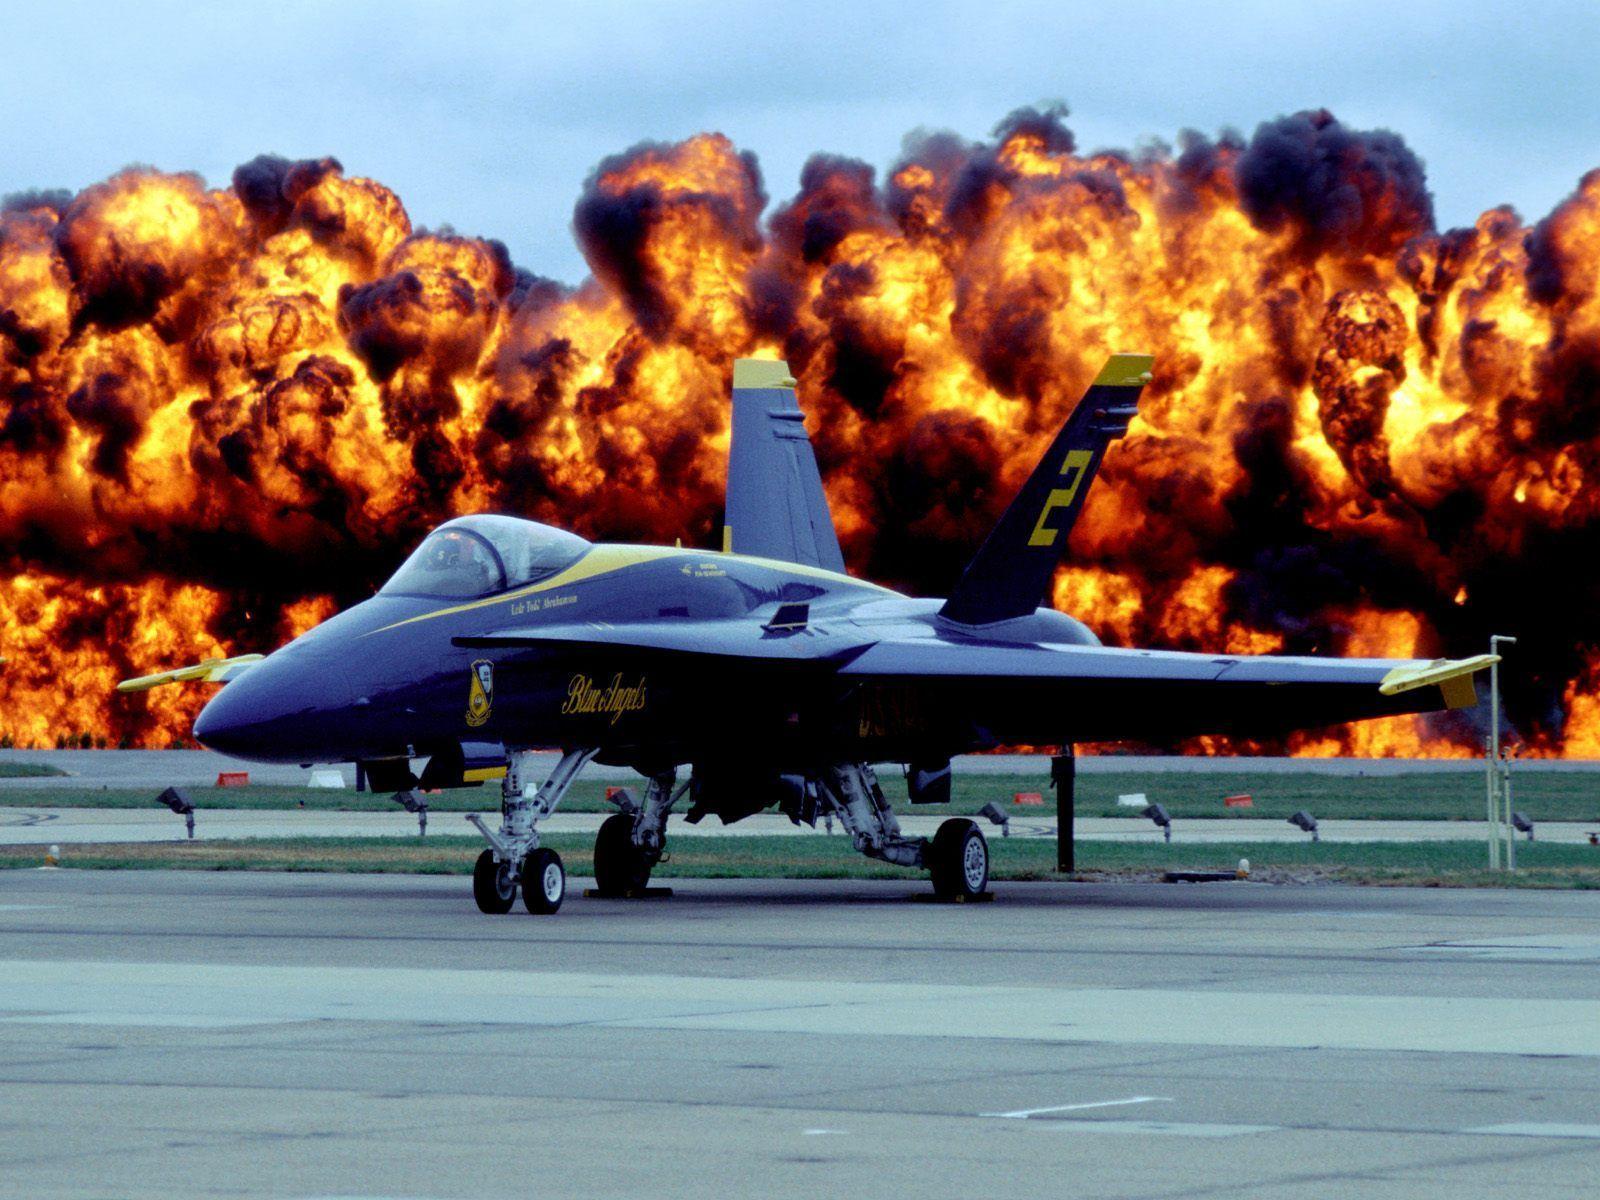 Fire Power Of Blue Angel Two Wallpaper Image featuring